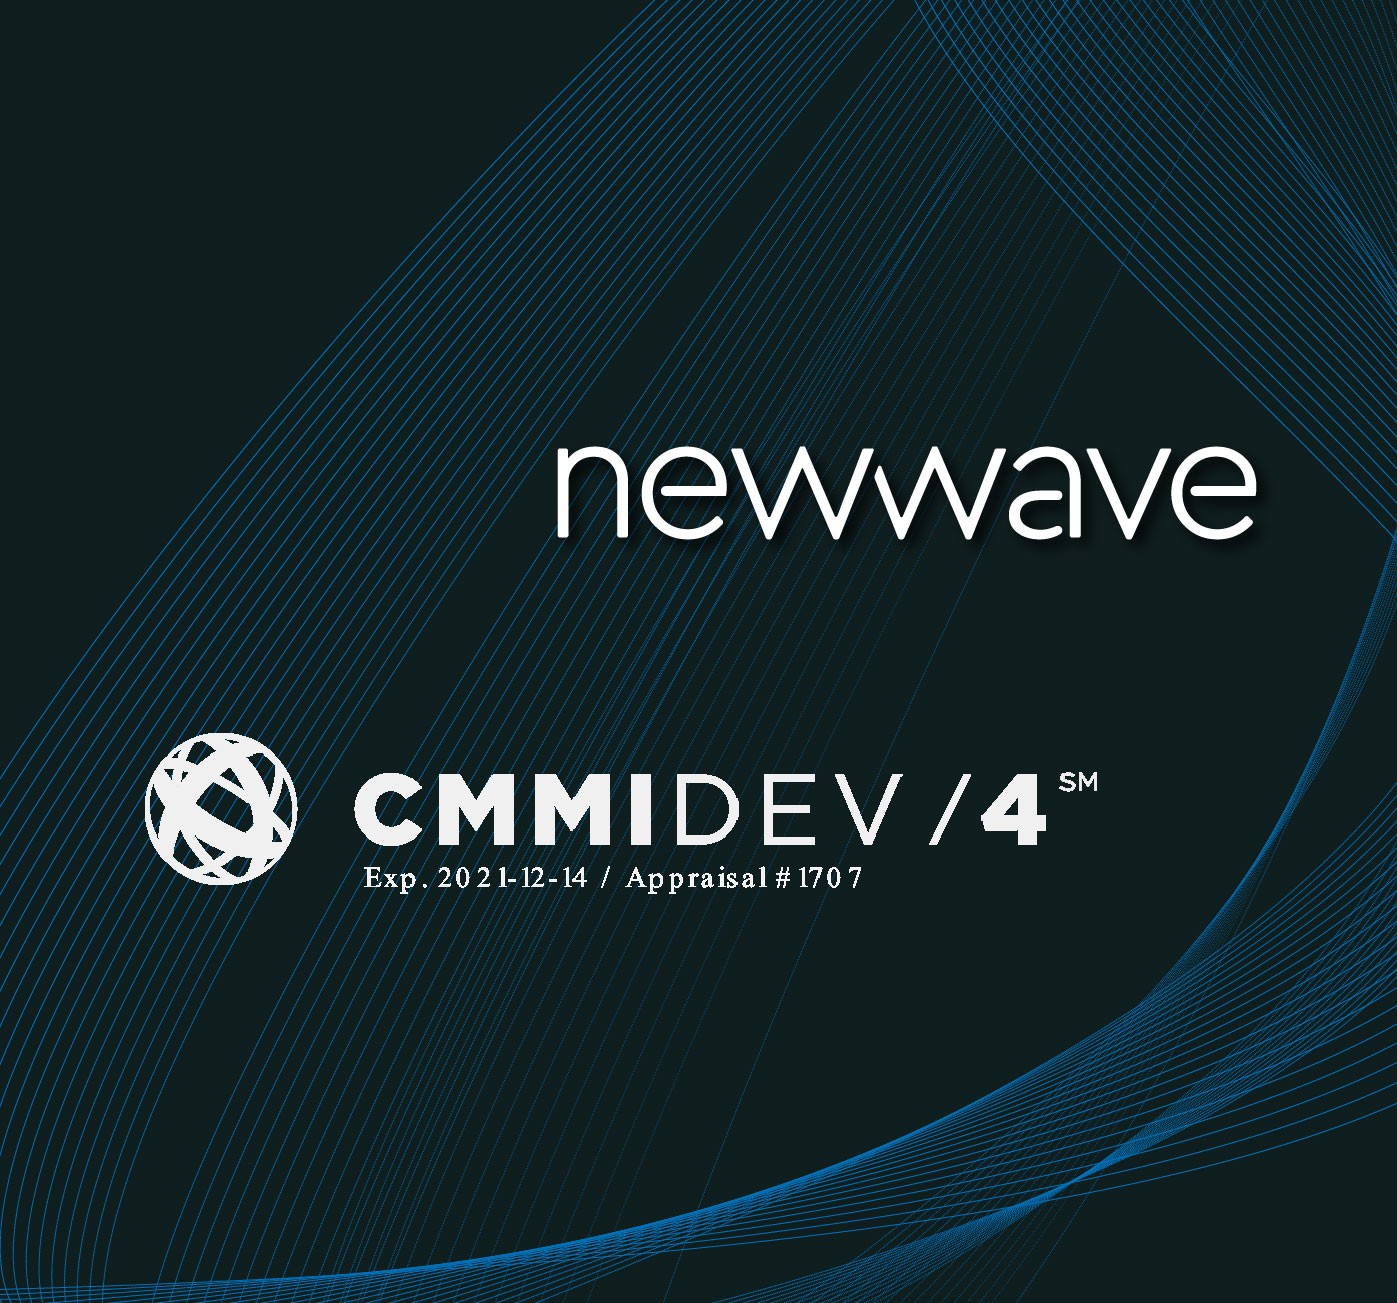 NewWave Appraised at Level 4 for Development of the CMMI Institute’s Capability Maturity Model Integration